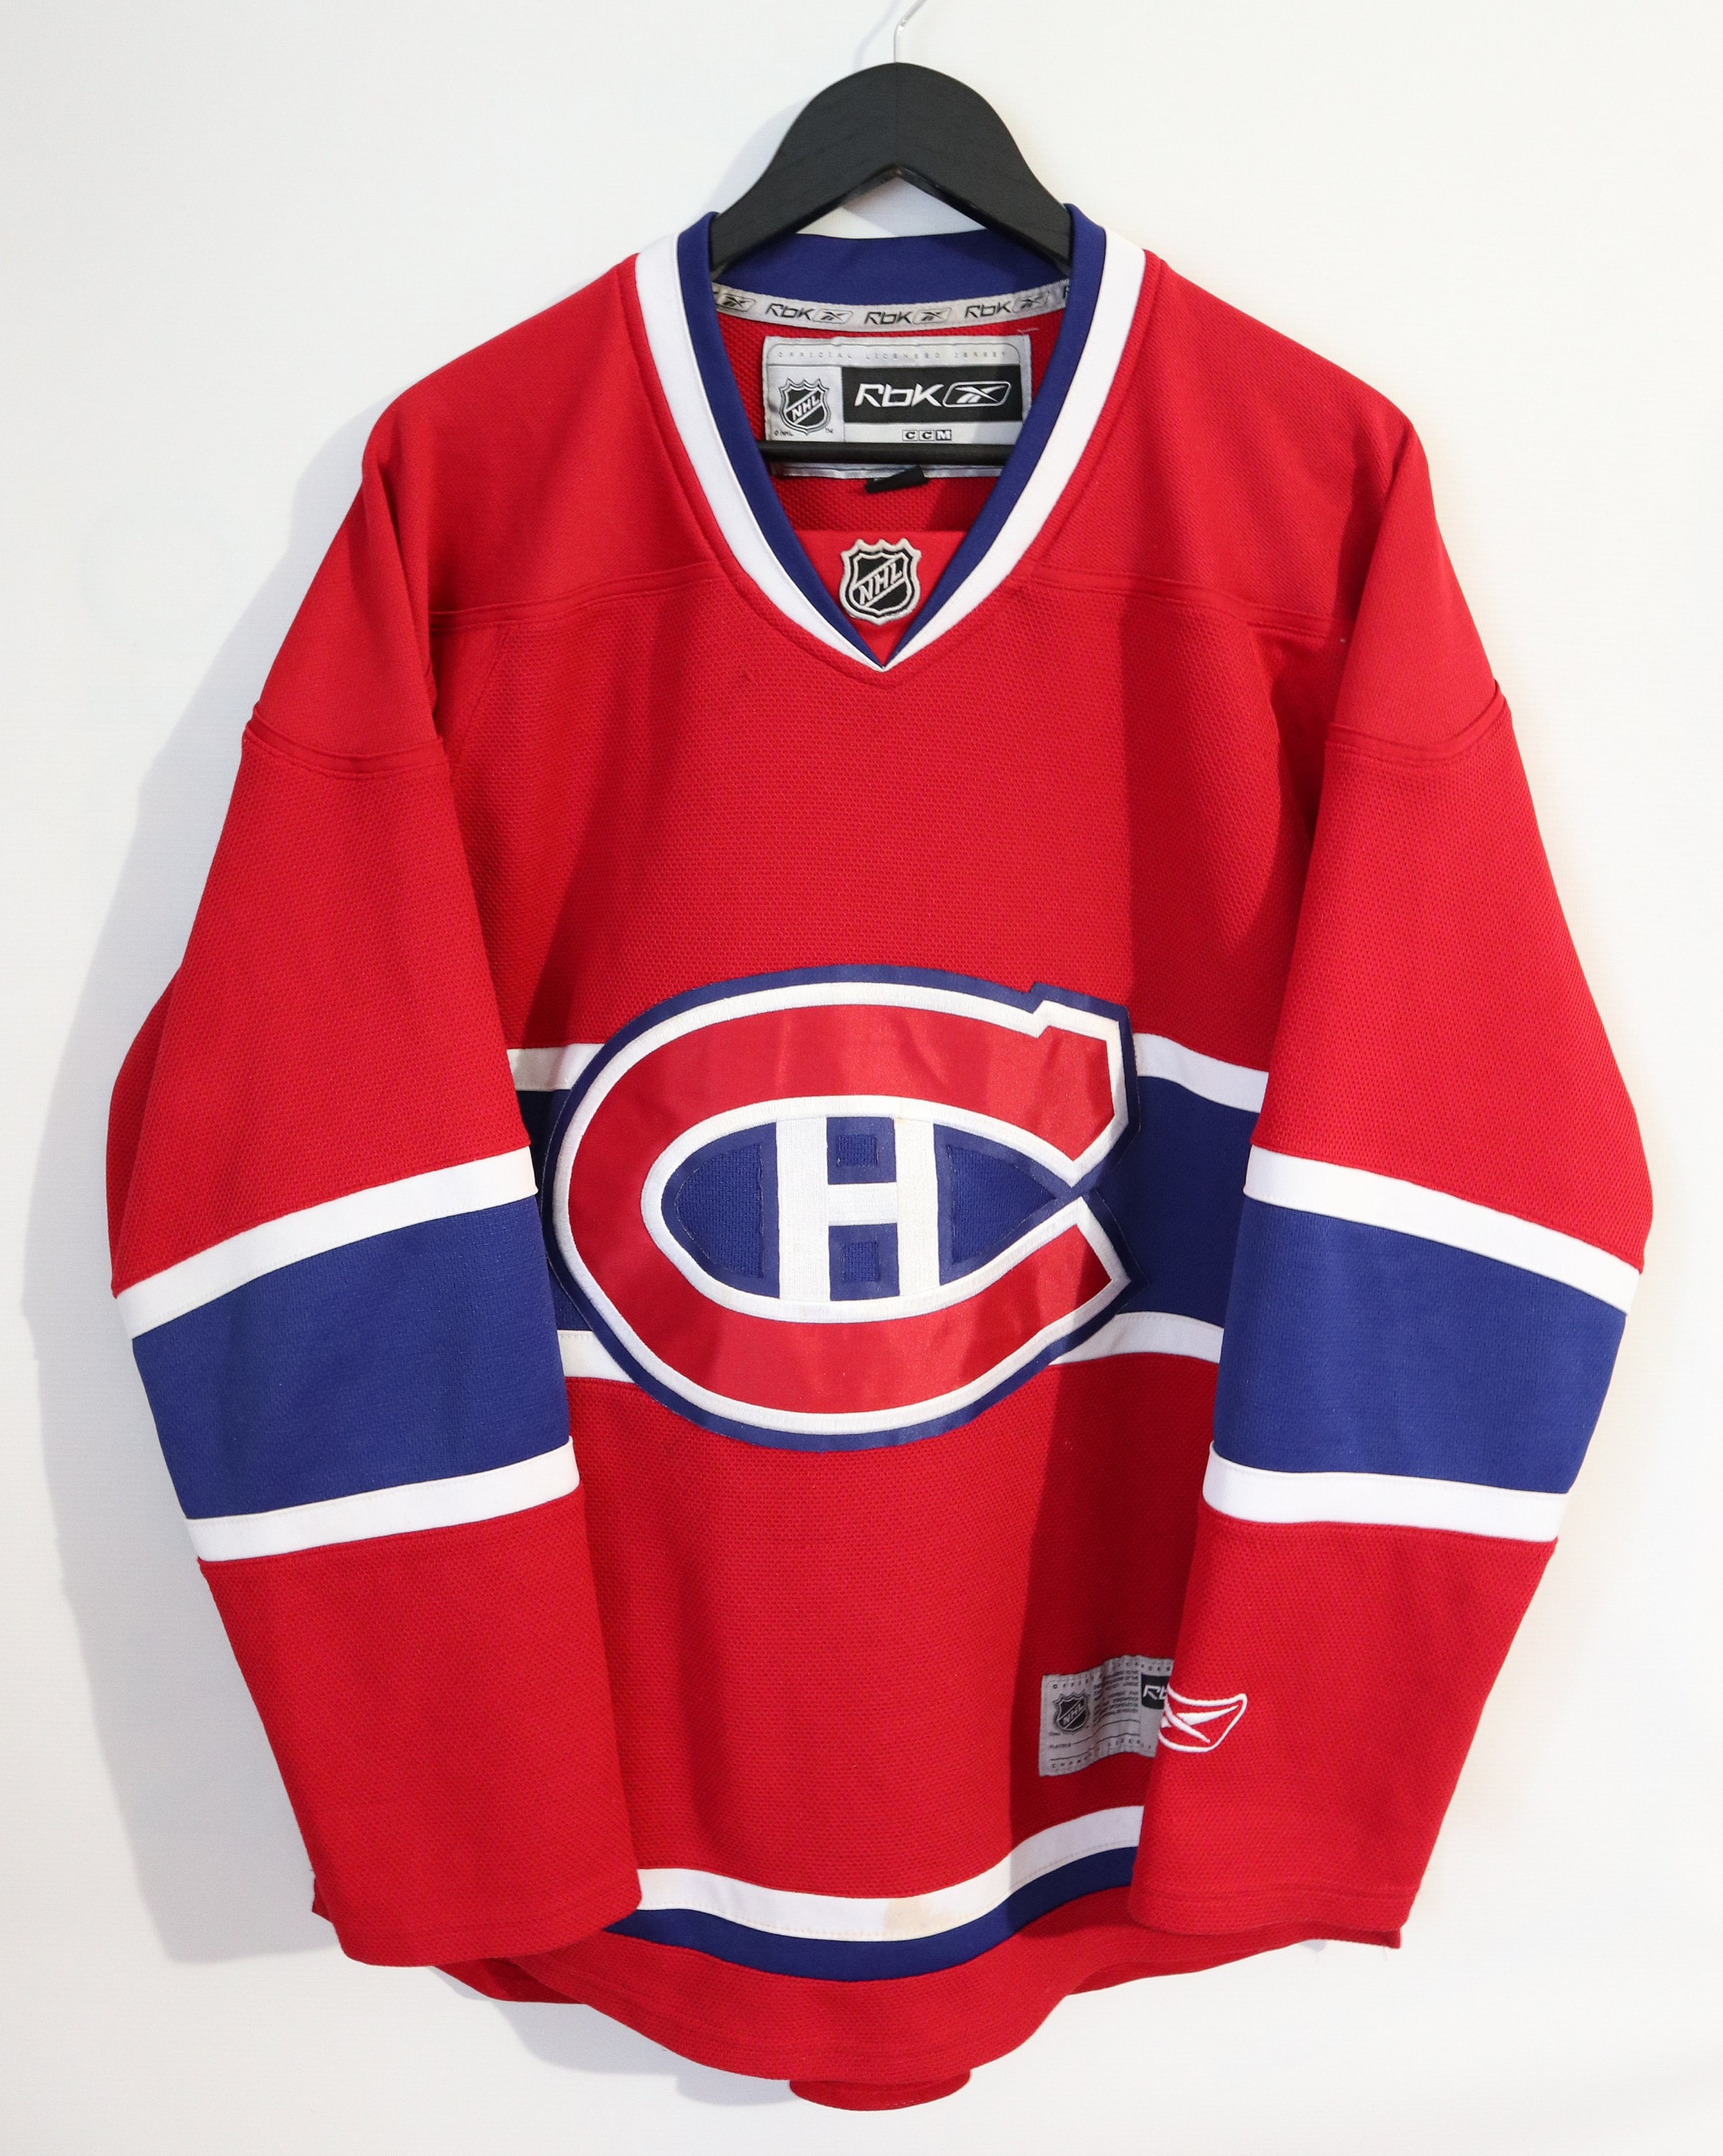 Buy NHL Montreal Canadiens Ice Hockey Jersey Shirt Reebok Online in India Etsy